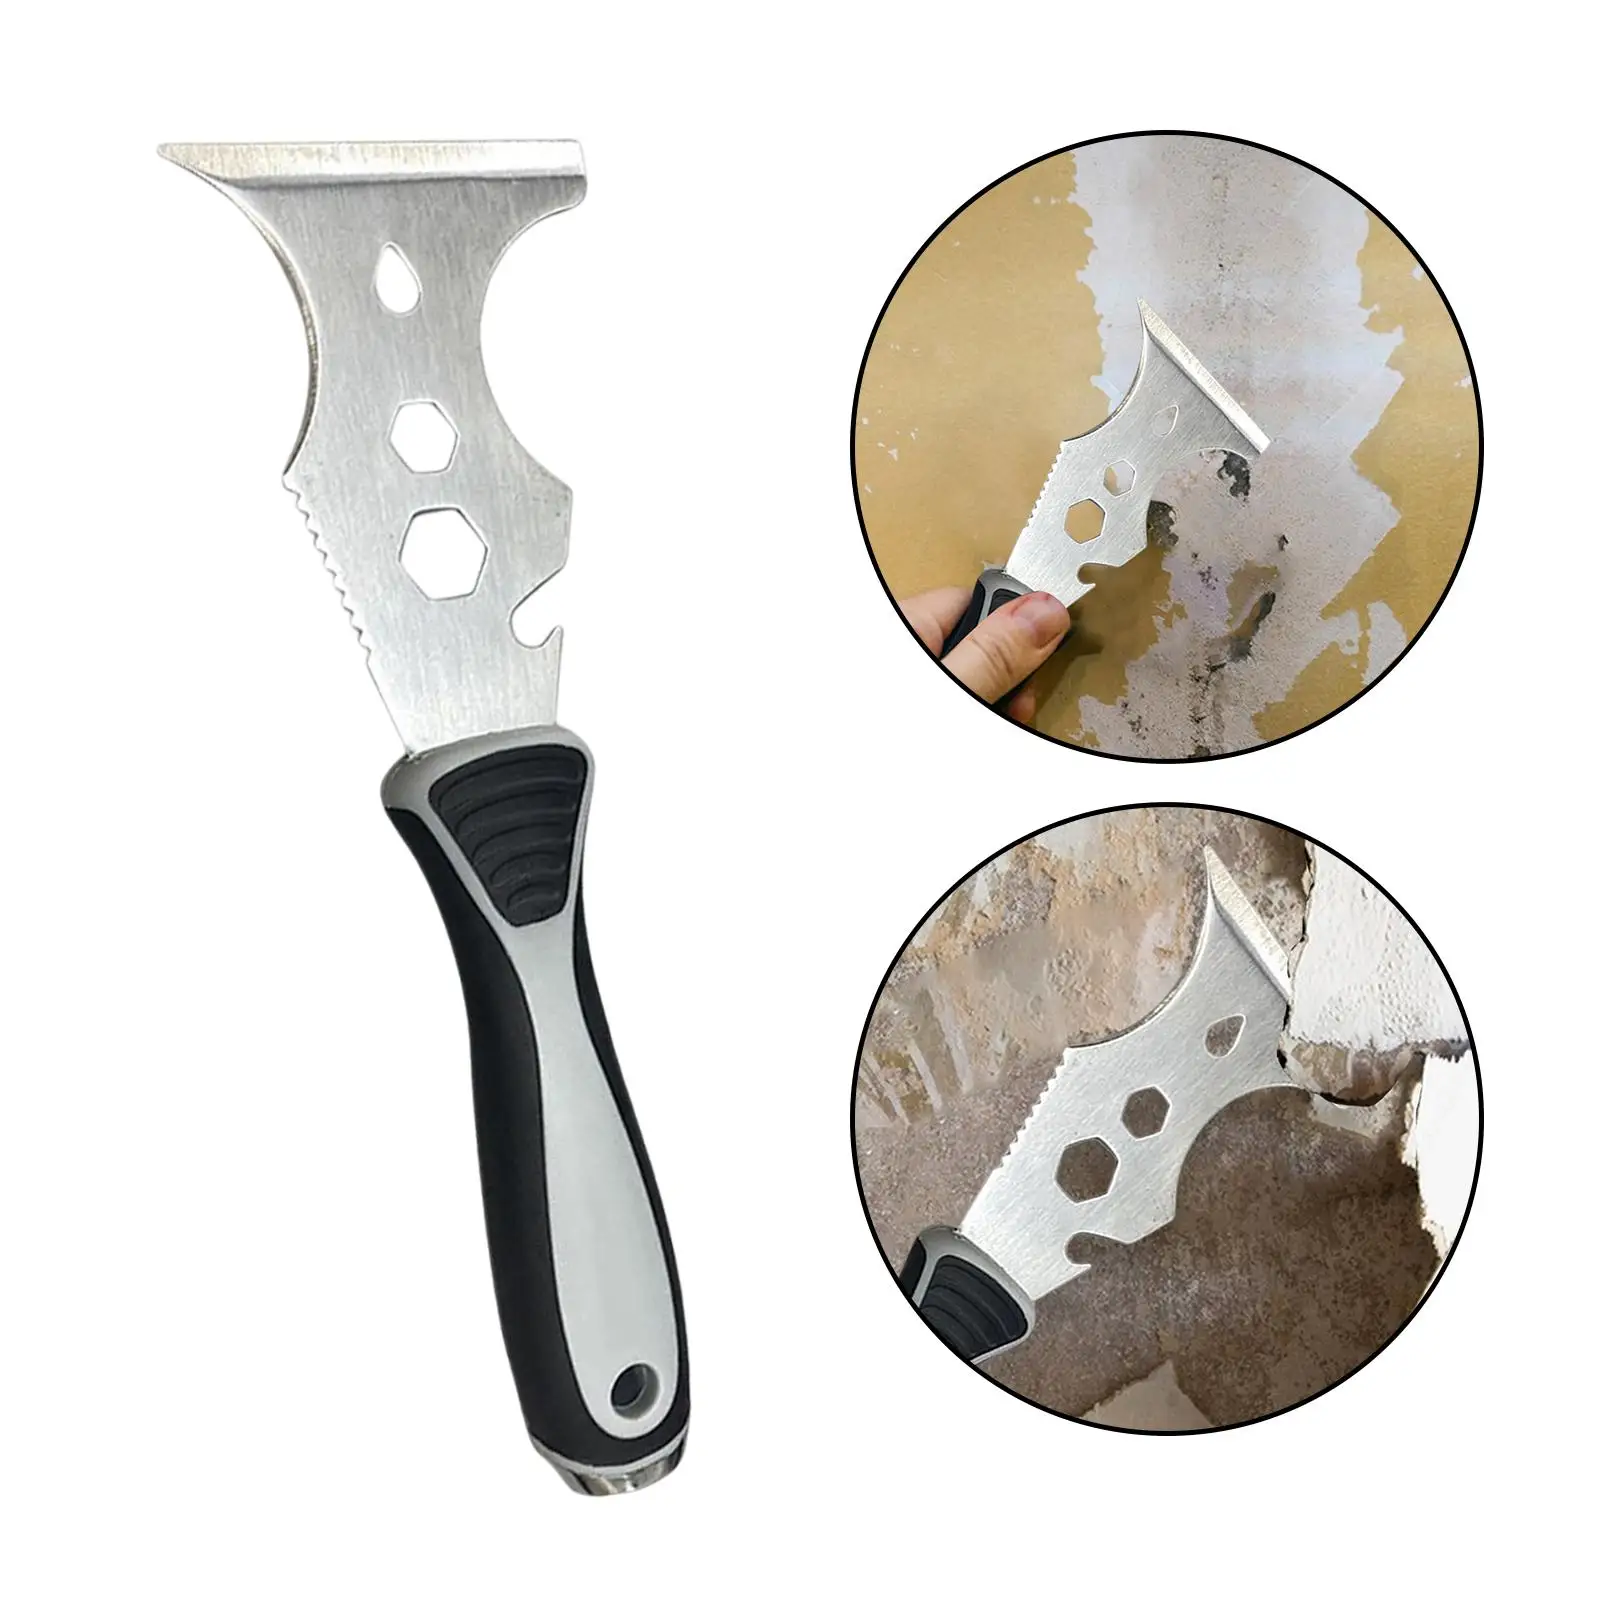 Stainless Steel Scraper Tool Paint Remover Glue Removing Tool Professional Multi Use Putty Knife for Home Decoration